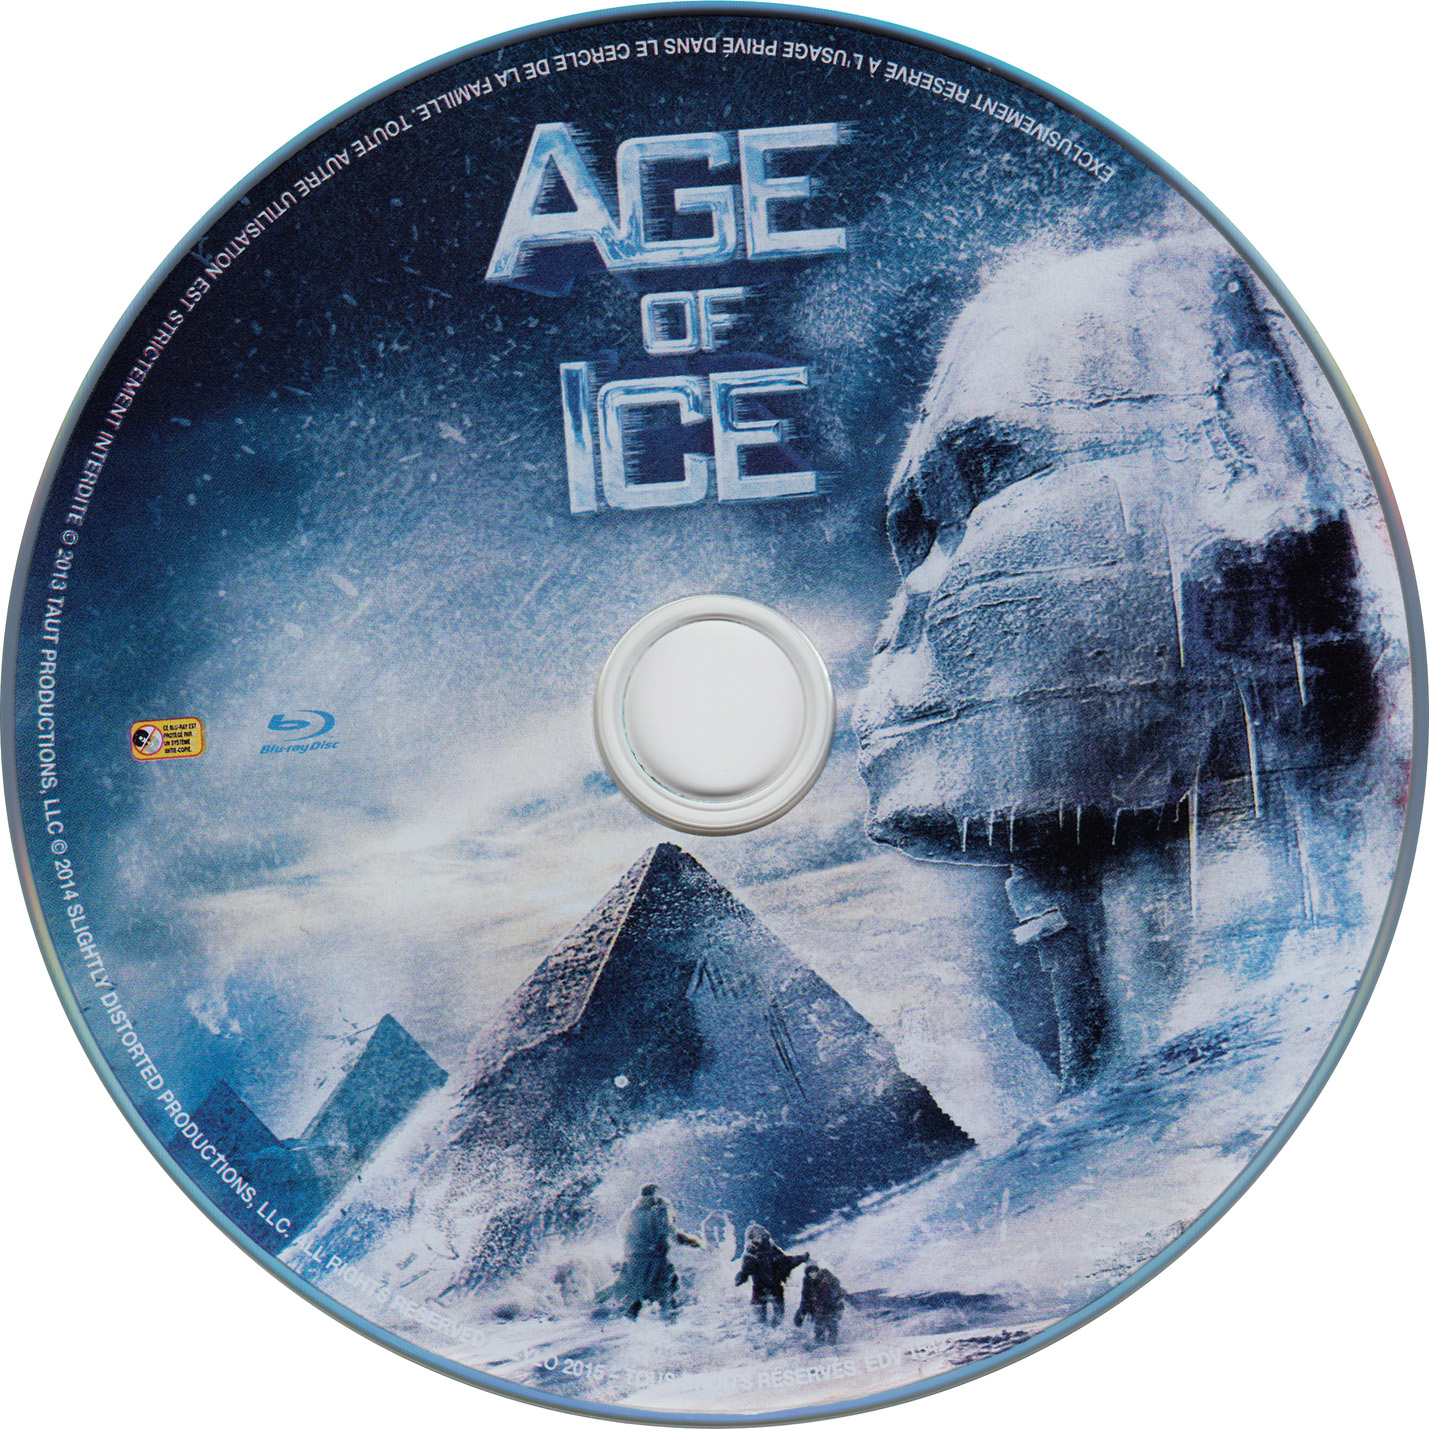 Age of ice (BLU-RAY)